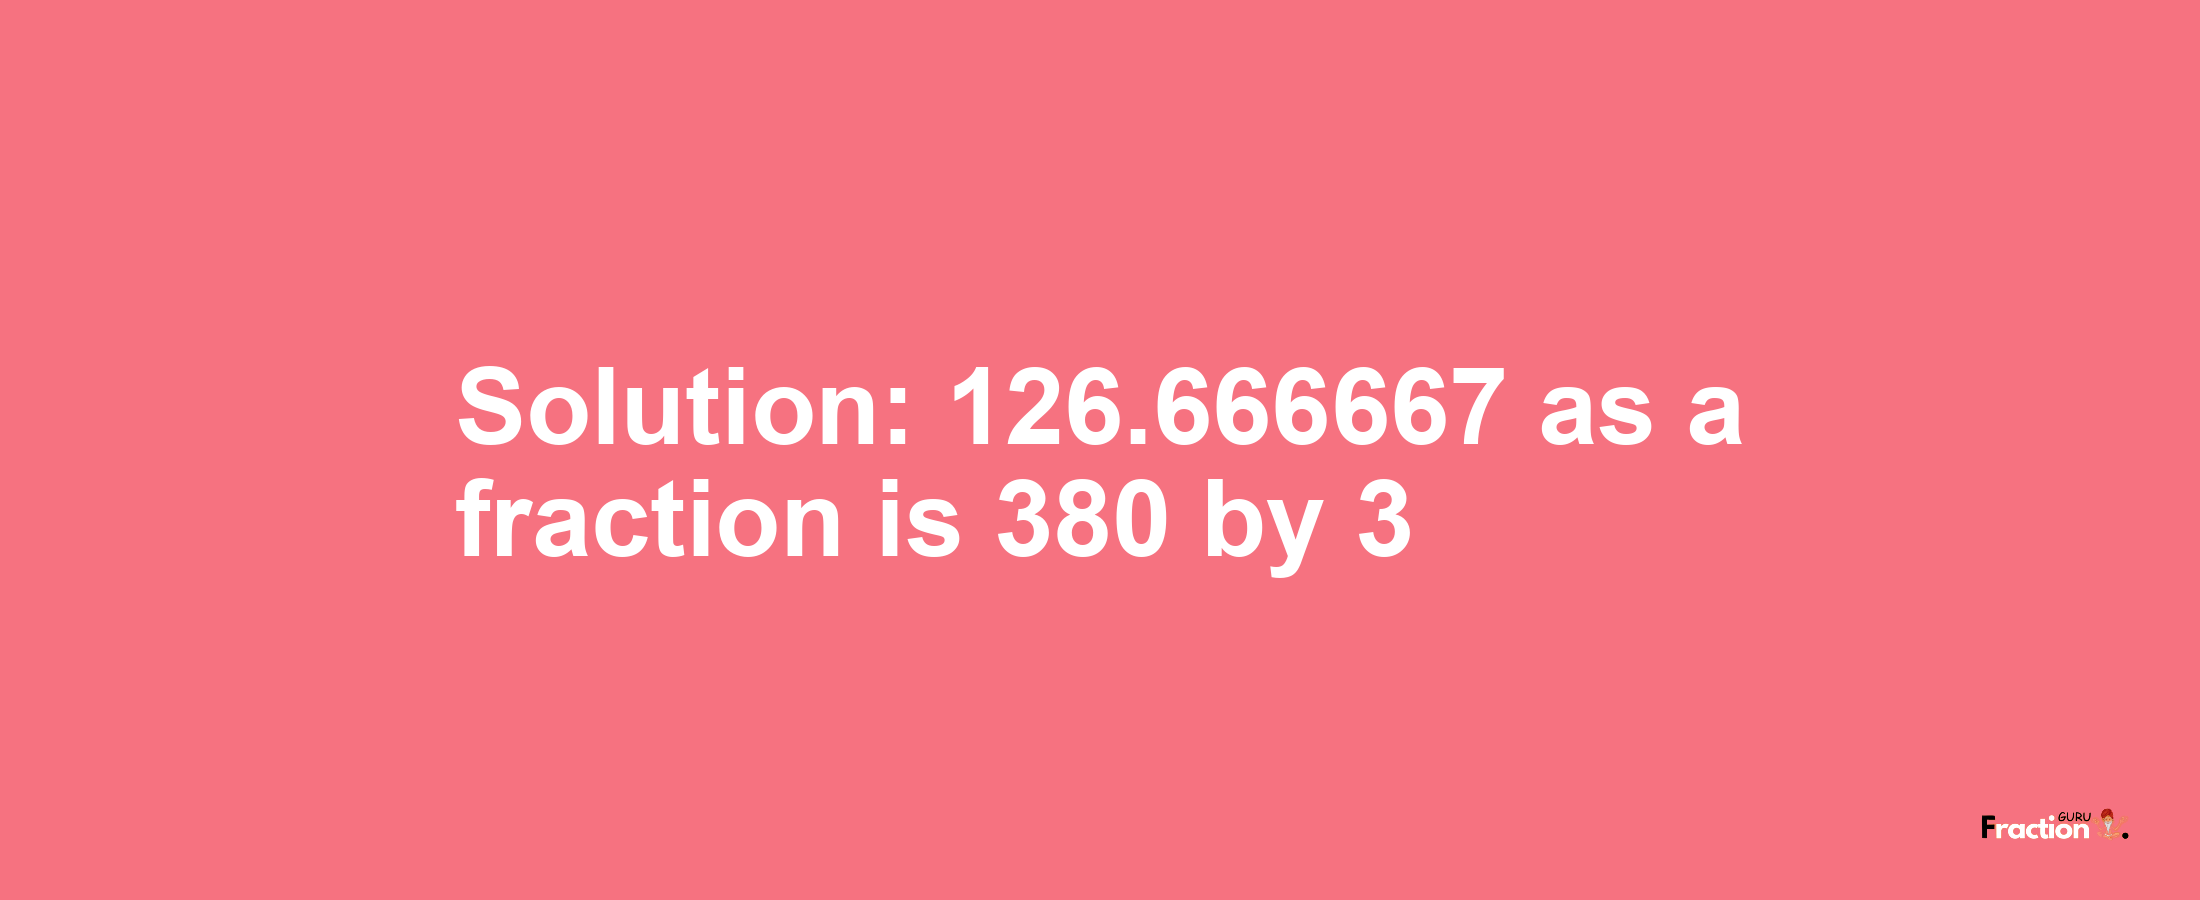 Solution:126.666667 as a fraction is 380/3